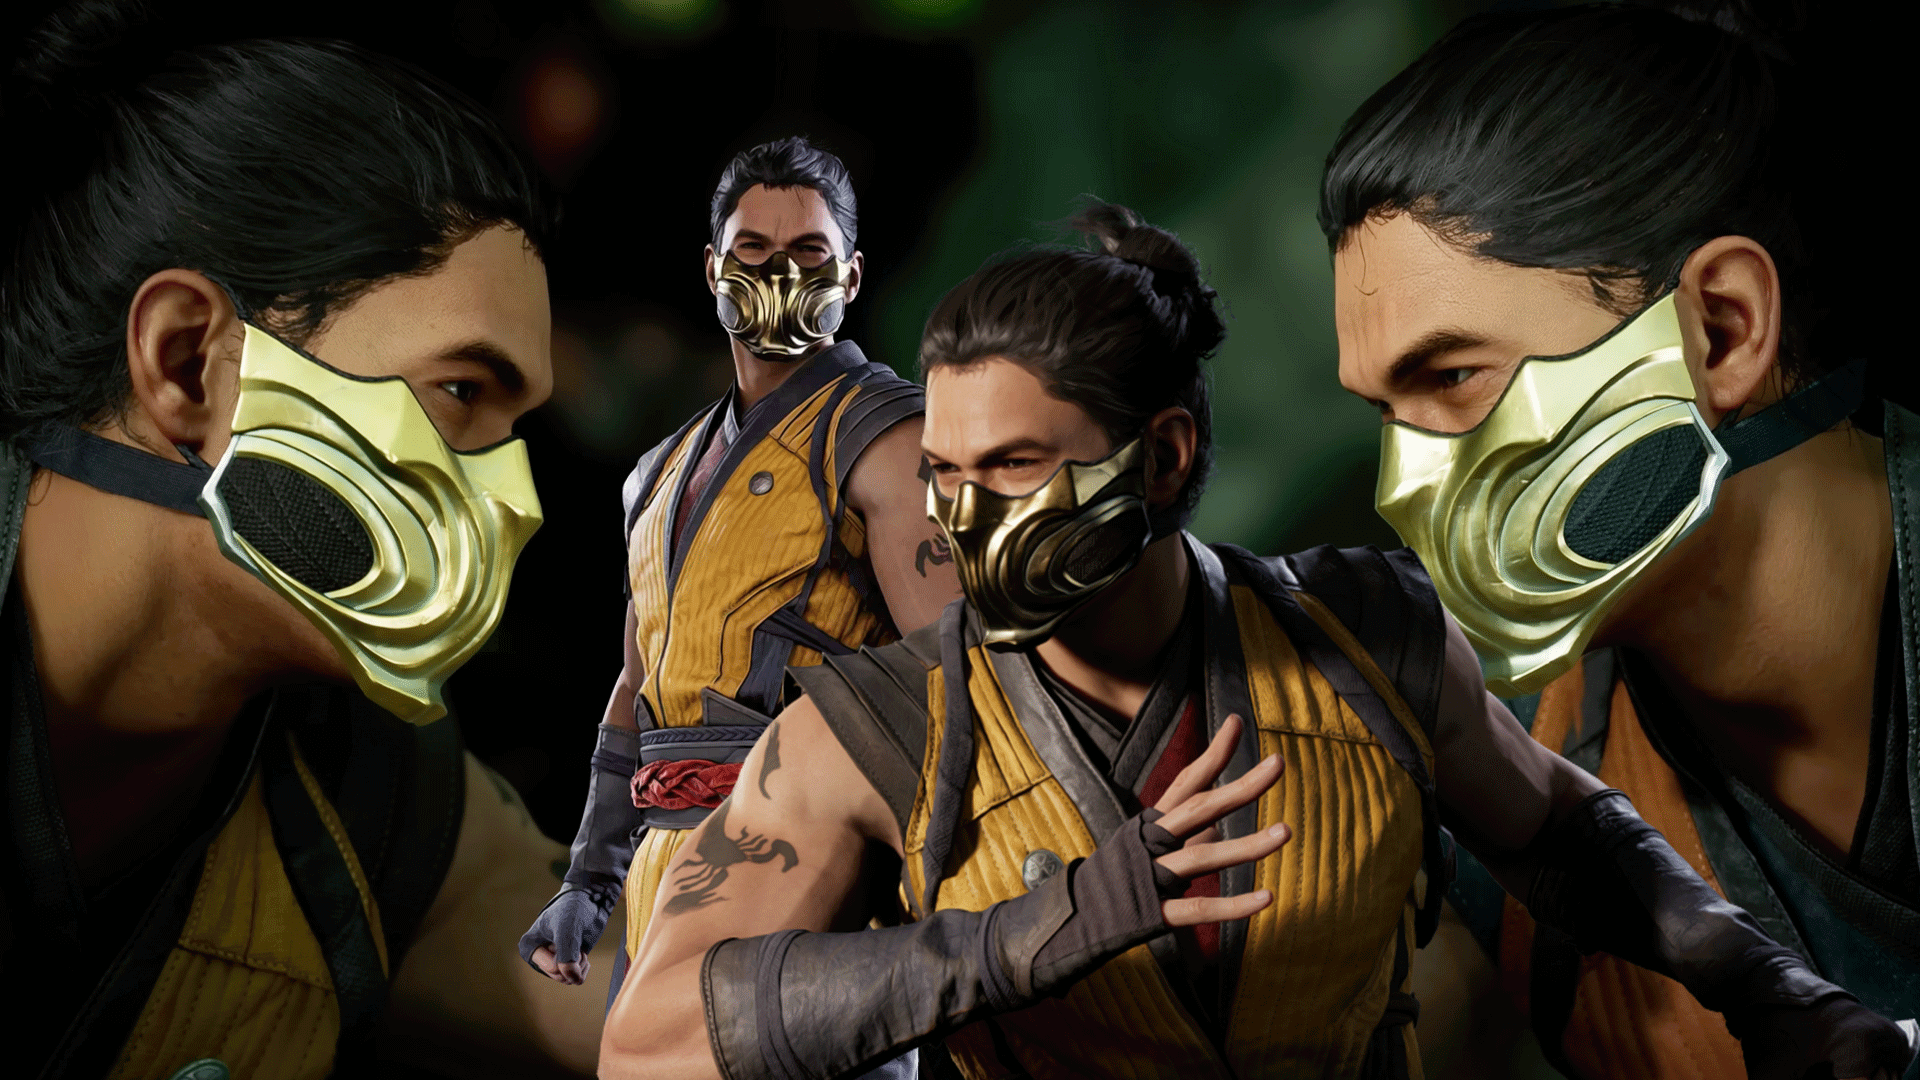 Mortal Kombat 1 Scorpion Character Guide: All You Need to Know